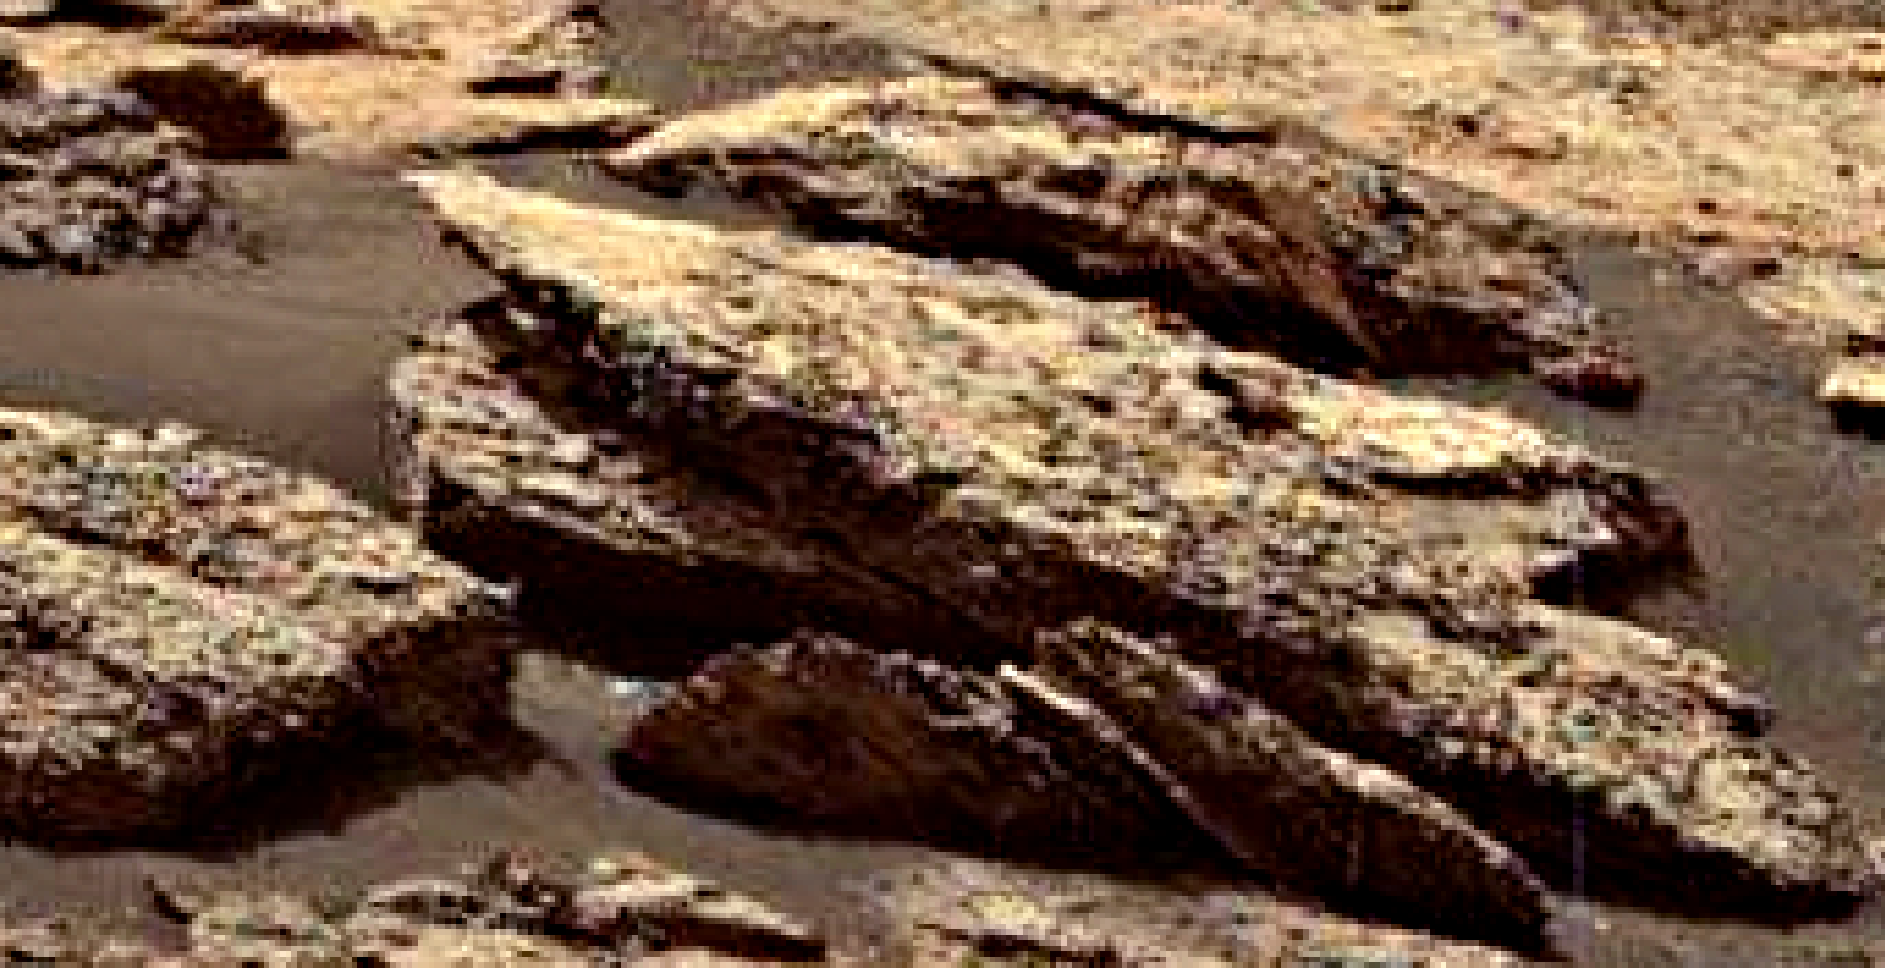 mars-sol-1485-anomaly-artifacts-1-was-life-on-mars